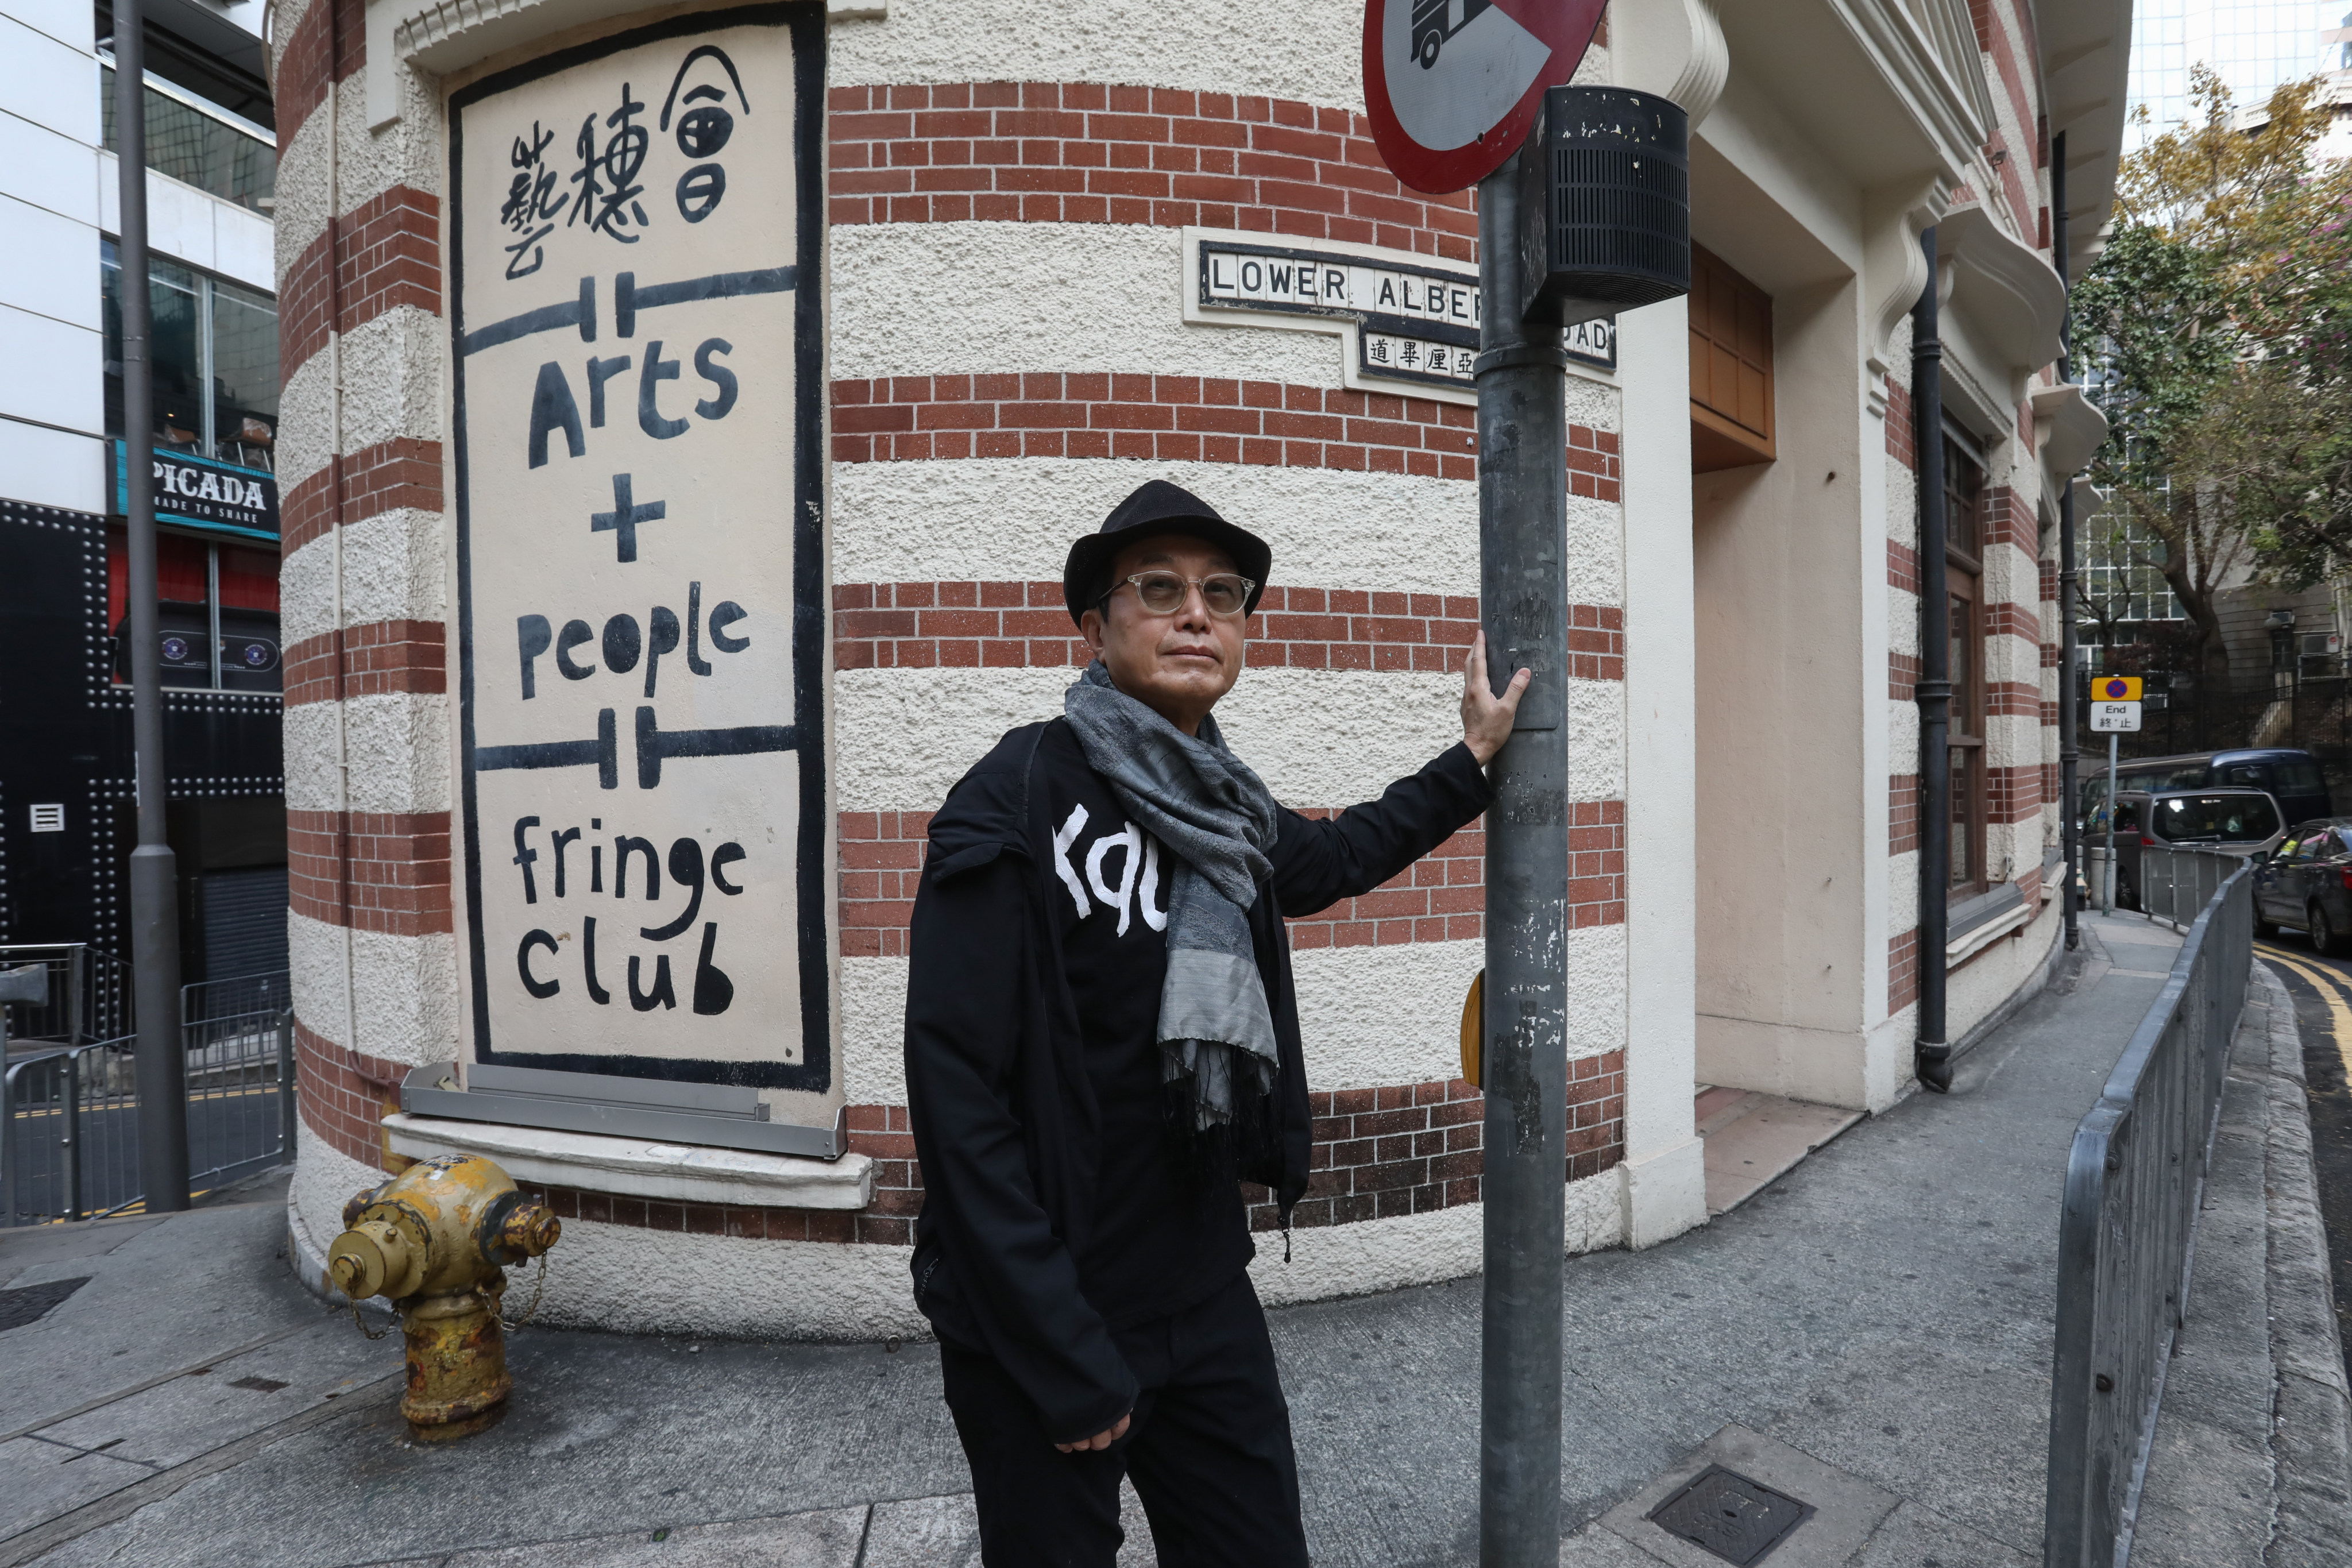 Director of the Hong Kong Fringe Club Benny Chia poses outside its premises in Lower Albert Road, Central, where its lease is up in 2023. Photo: Jonathan Wong